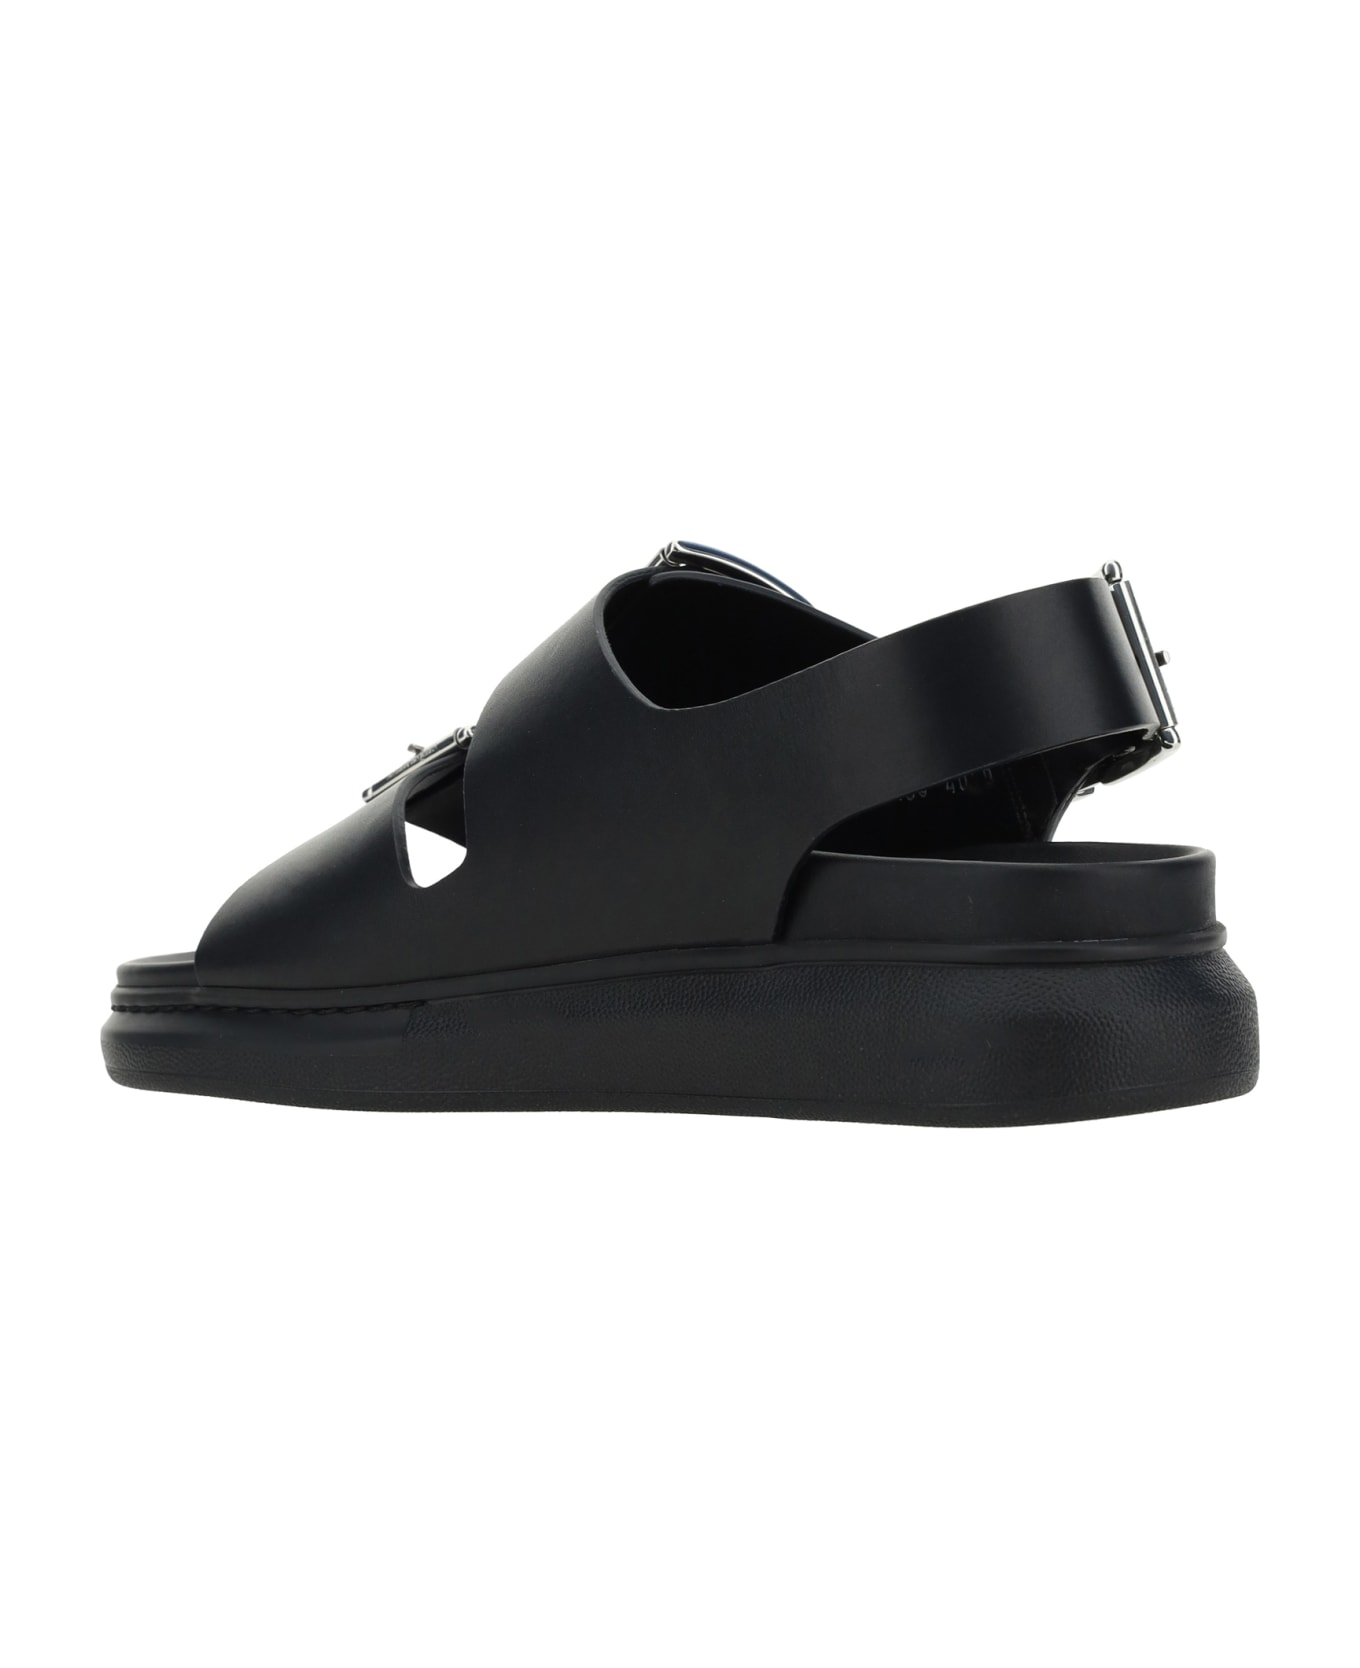 Alexander McQueen Leather Sandal - Black/silver その他各種シューズ